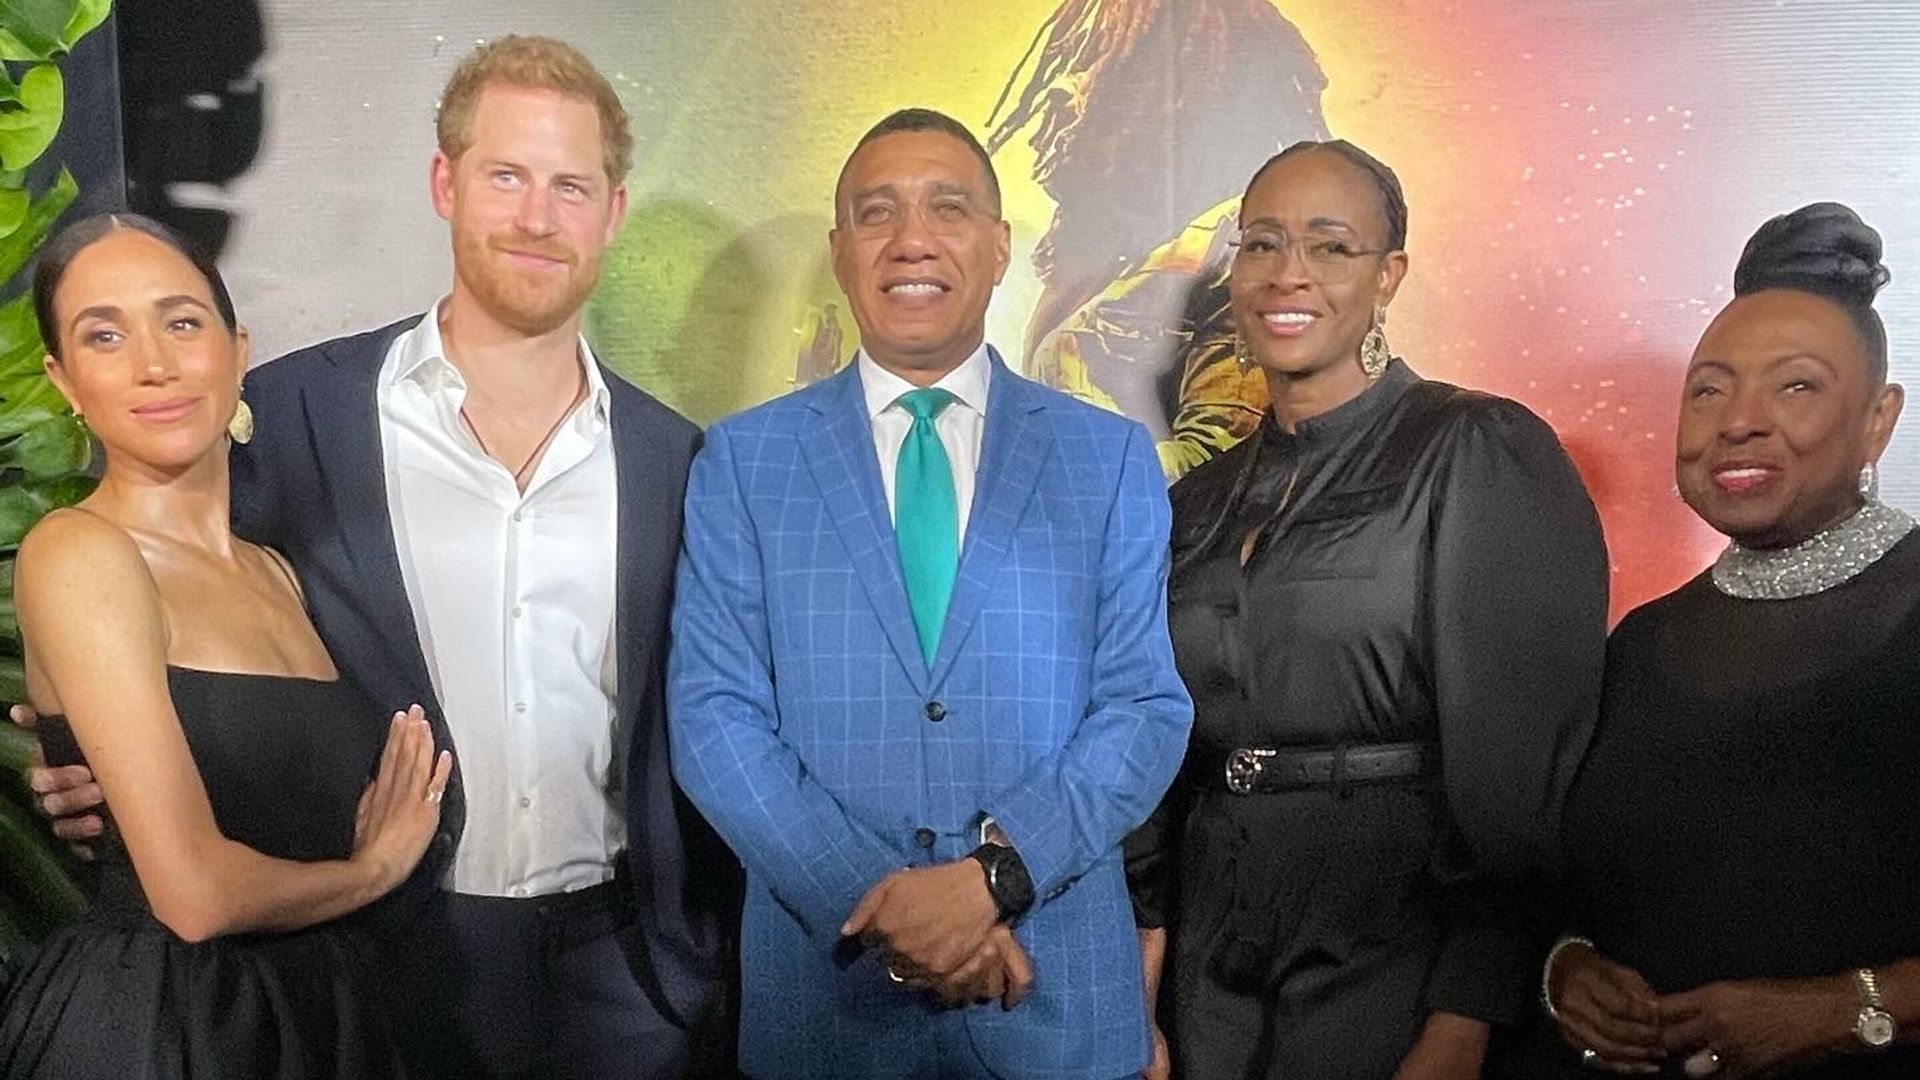 The Duke and Duchess of Sussex with Jamaica's Prime Minister Andrew Holness and his wife Juliet